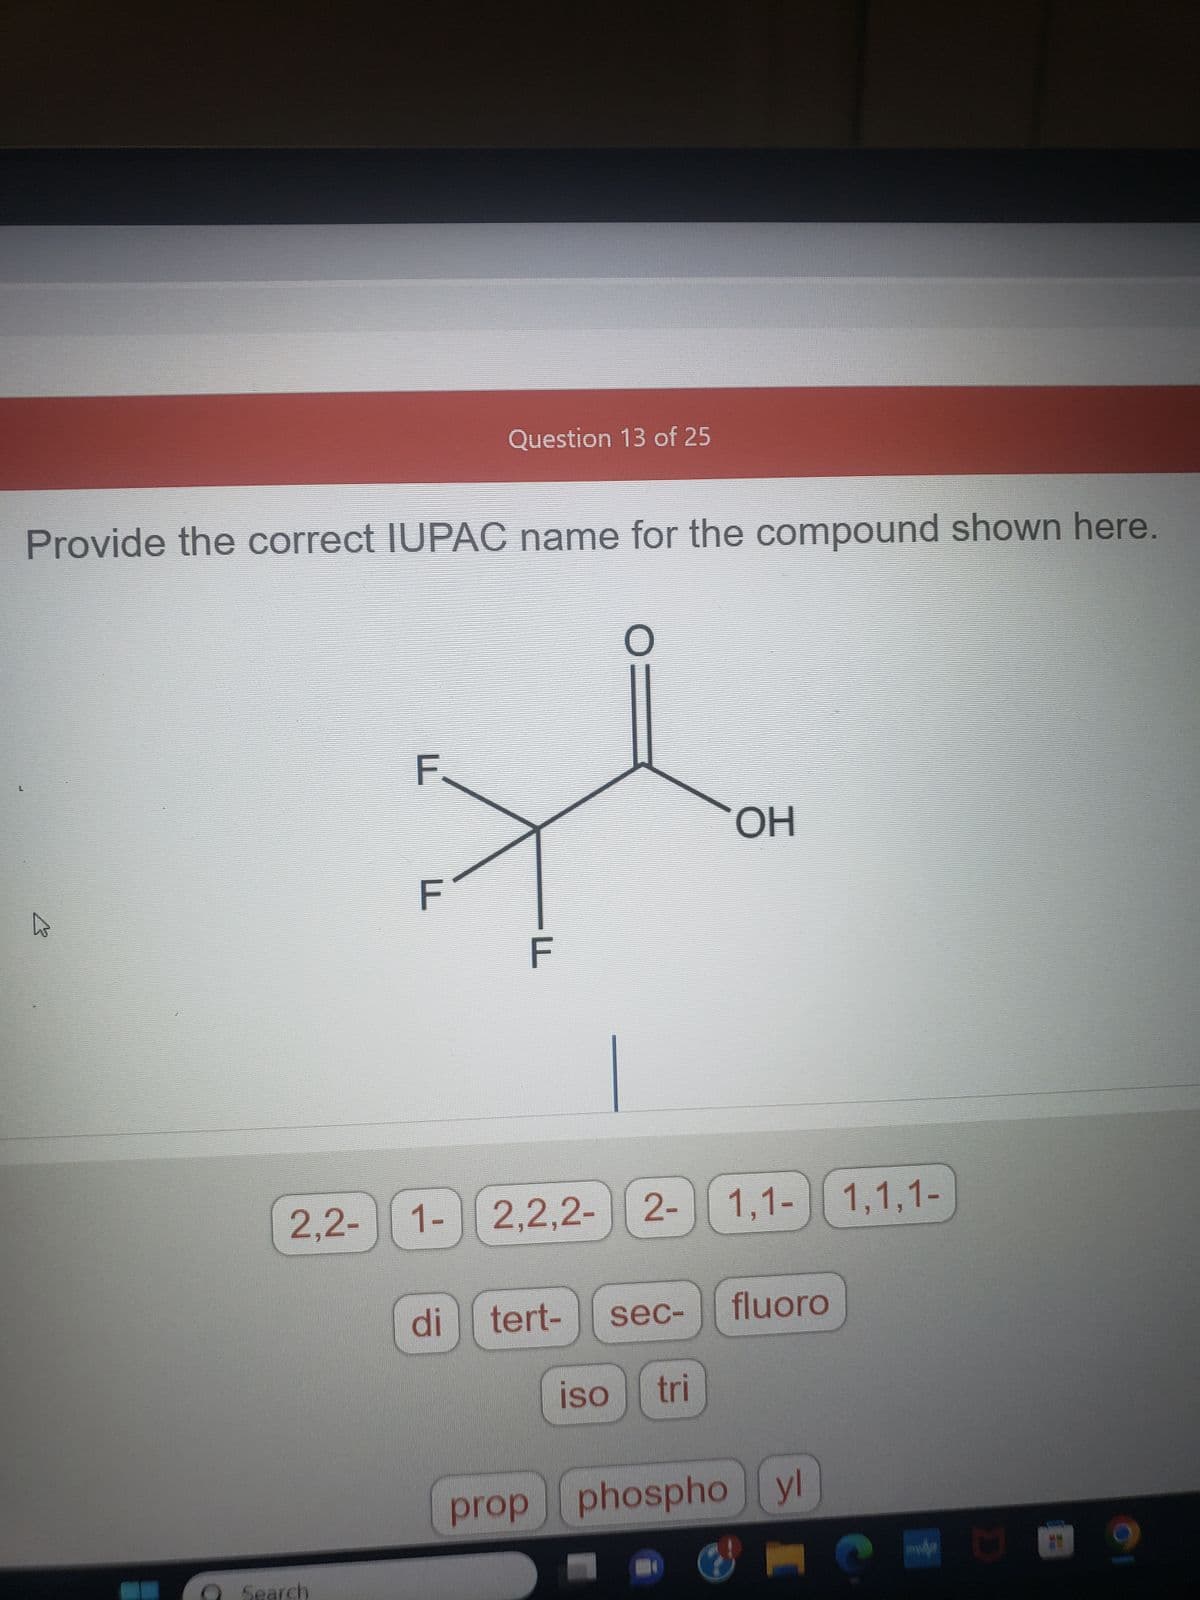 L
Provide the correct IUPAC name for the compound shown here.
F
Search
2,2- 1-
Question 13 of 25
2-
1- 2,2,2- 2-
di
LL
tert-
sec-
iso
tri
ОН
1,1-1,1,1-
fluoro
prop phospho yl
S
U